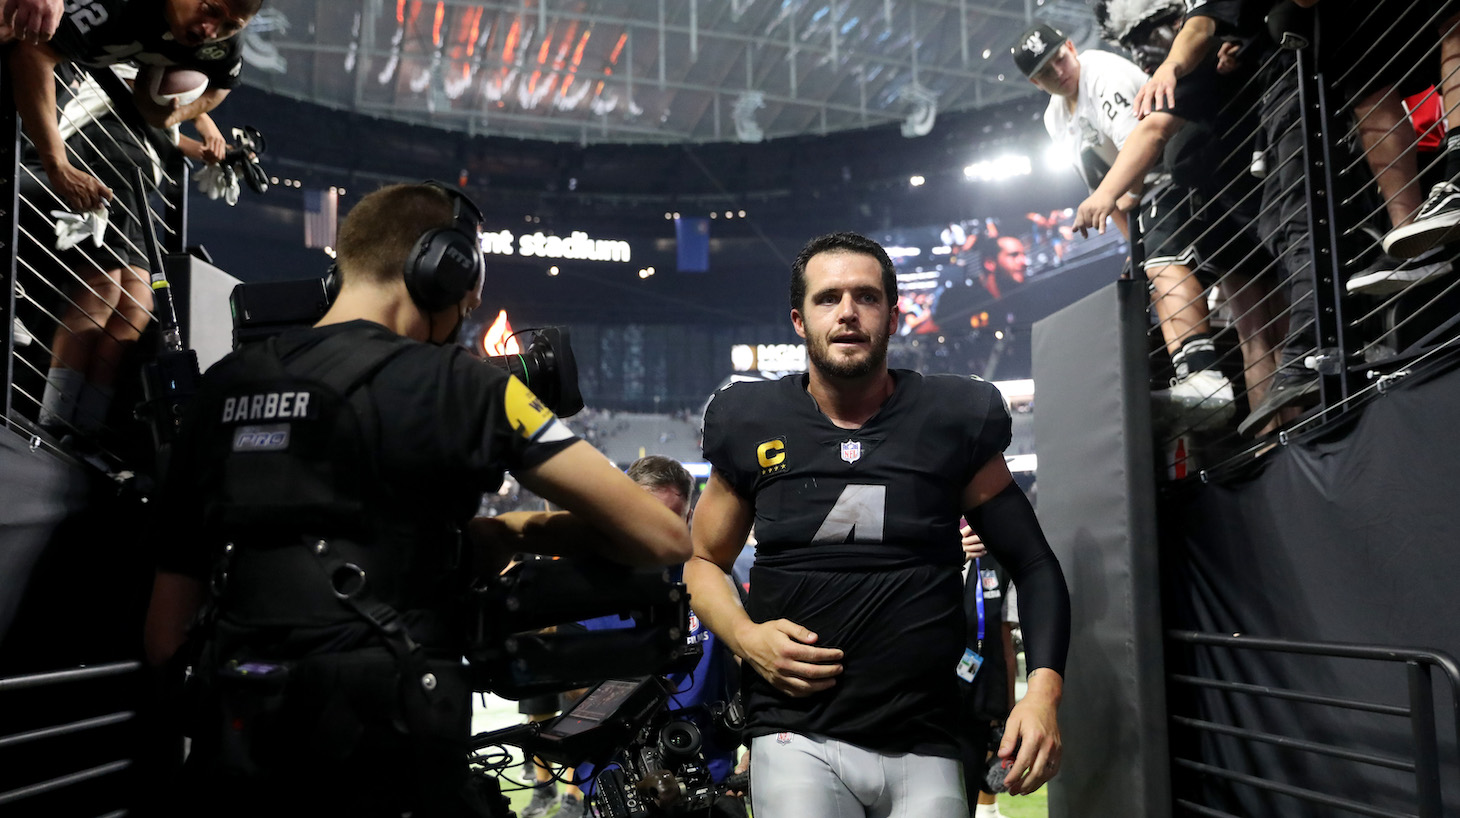 LAS VEGAS, NEVADA - SEPTEMBER 13: Derek Carr #4 of the Las Vegas Raiders leaves the field after the Las Vegas Raiders defeat the Baltimore Ravens 33-27 in overtime at Allegiant Stadium on September 13, 2021 in Las Vegas, Nevada. (Photo by Christian Petersen/Getty Images)